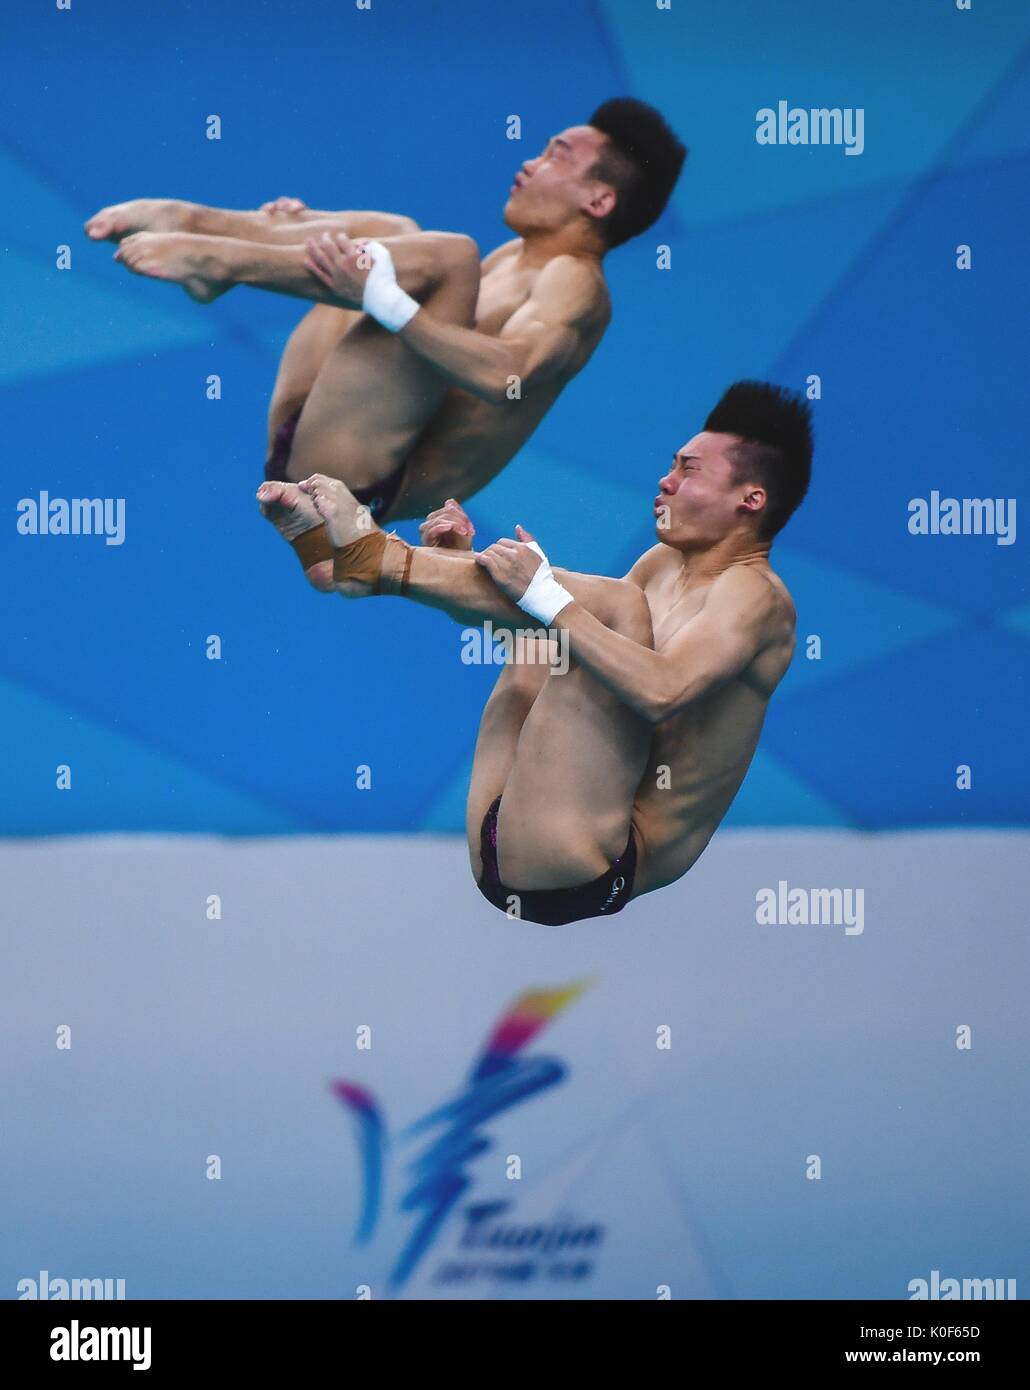 Tianjin. 23rd Aug, 2017. Chen Aisen of Guangdong and Yang Hao of Shaanxi compete during the men's 10m platform synchronised final of Diving at the 13th Chinese National Games in north China's Tianjin Municipality, Aug. 23, 2017. Chen Aisen and Yang Hao claimed title with 496.95 points. Credit: Li Xiang/Xinhua/Alamy Live News Stock Photo